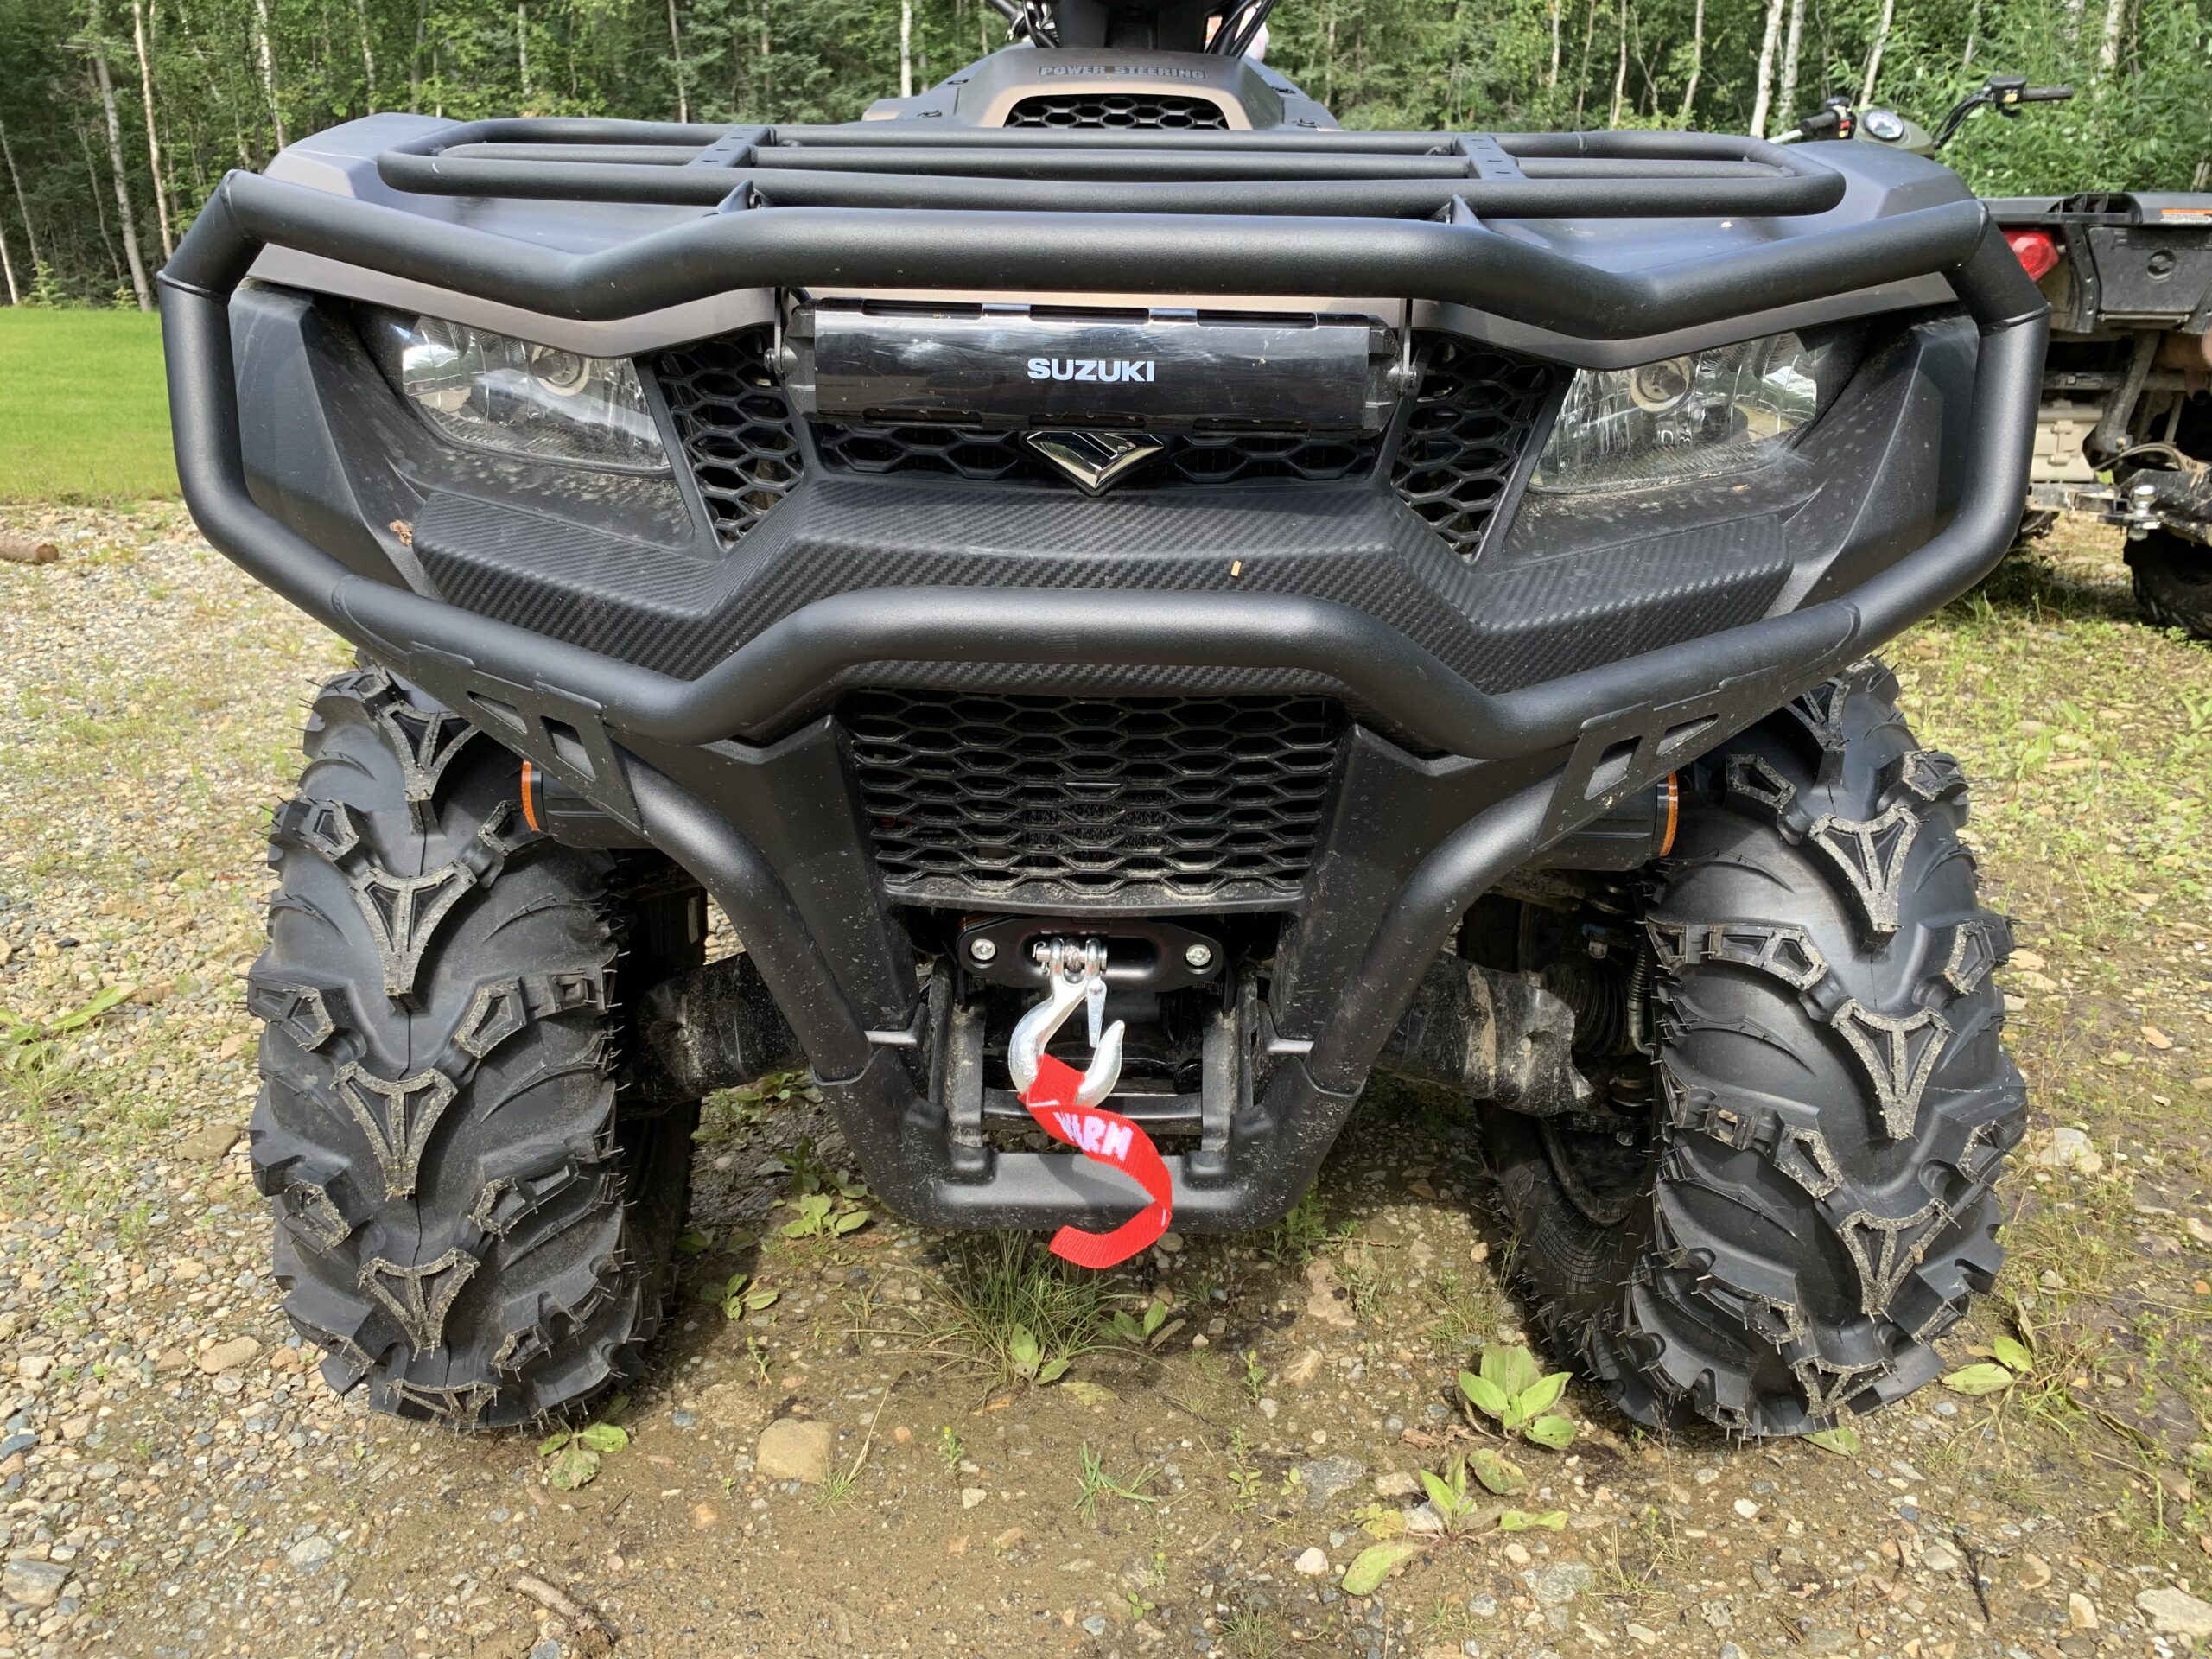 A good set of aftermarket tires will make you ATV perform at its best.